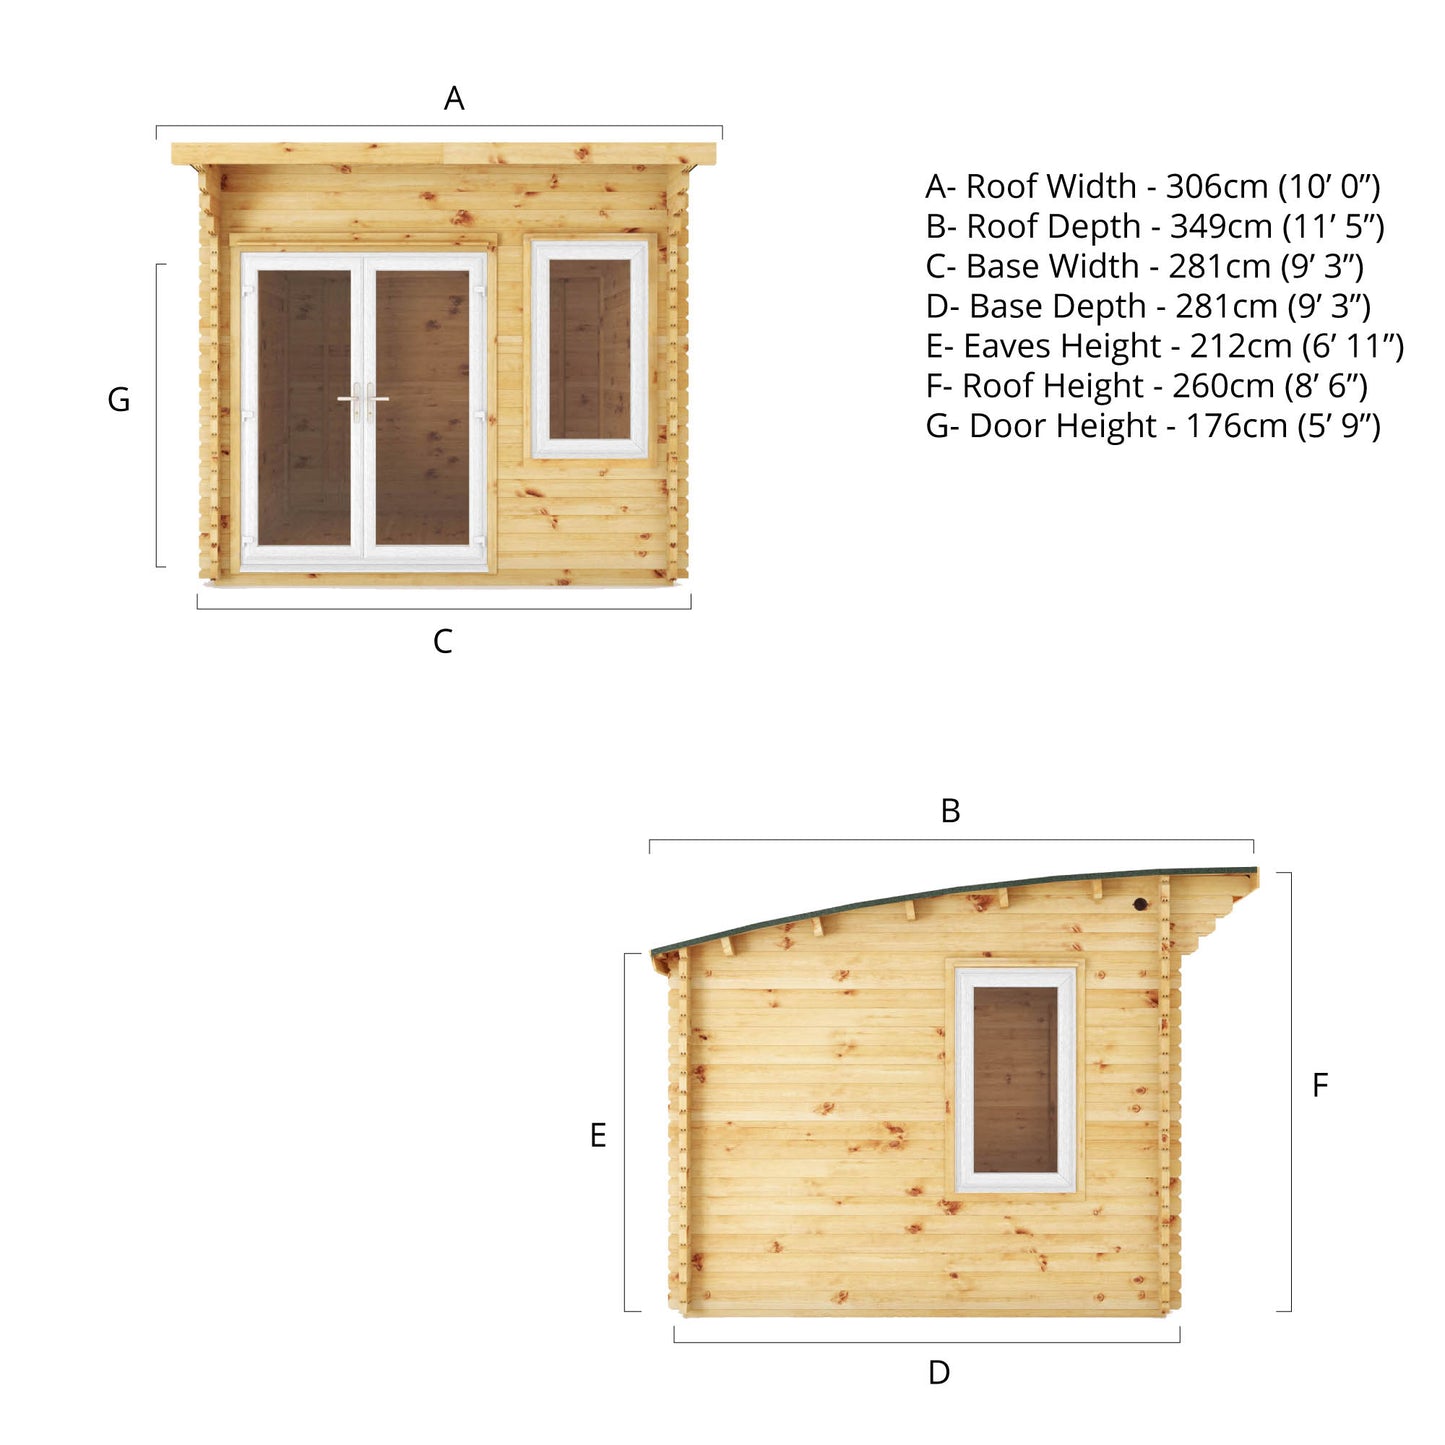 The 3m x 3m Tawny Curved Roof Log Cabin with White UPVC